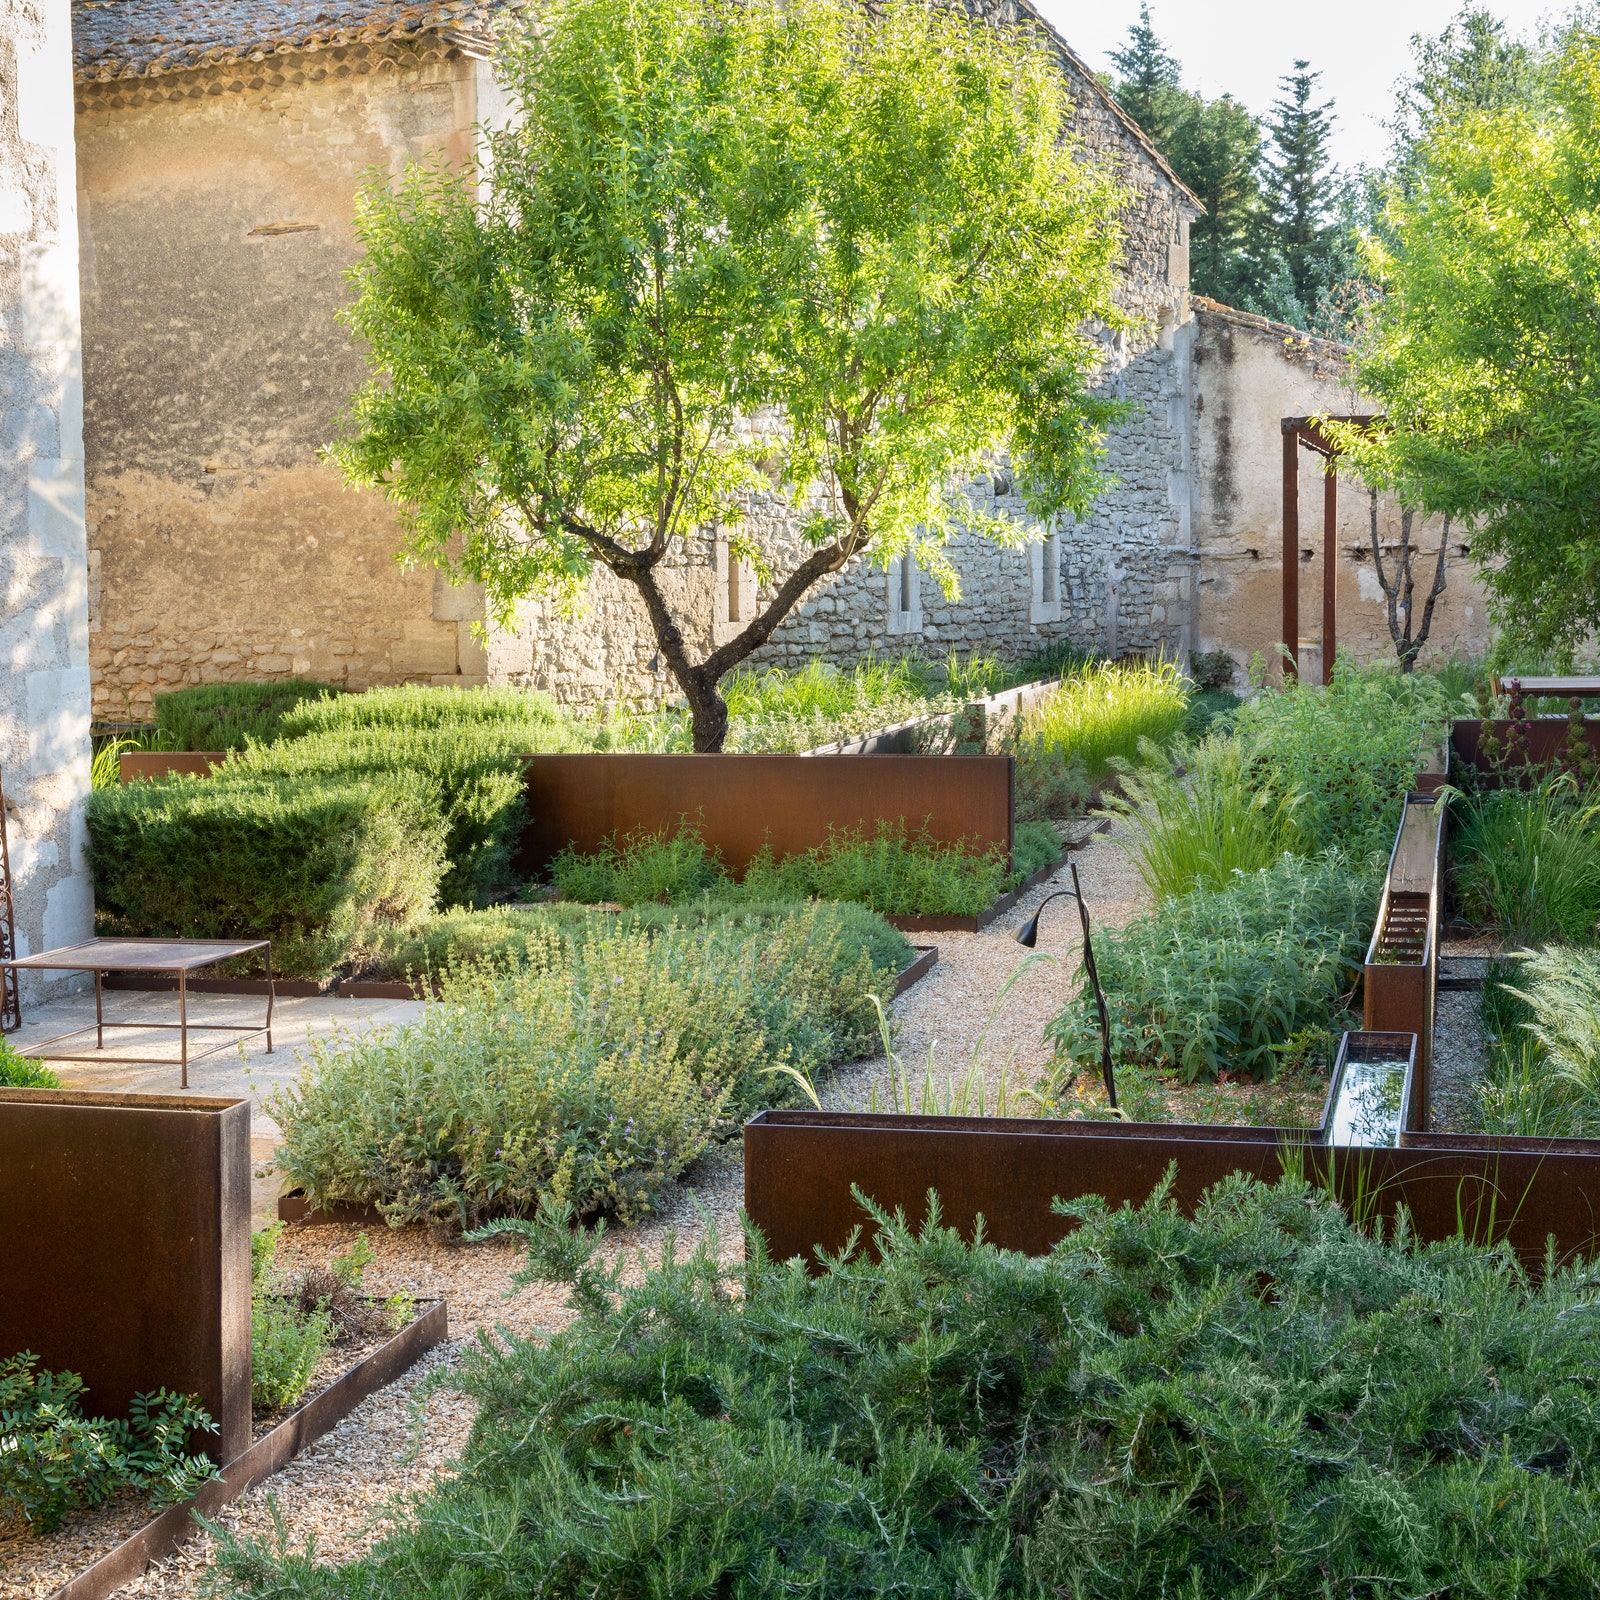 A Provençal garden with a modernist aesthetic and ecological approach